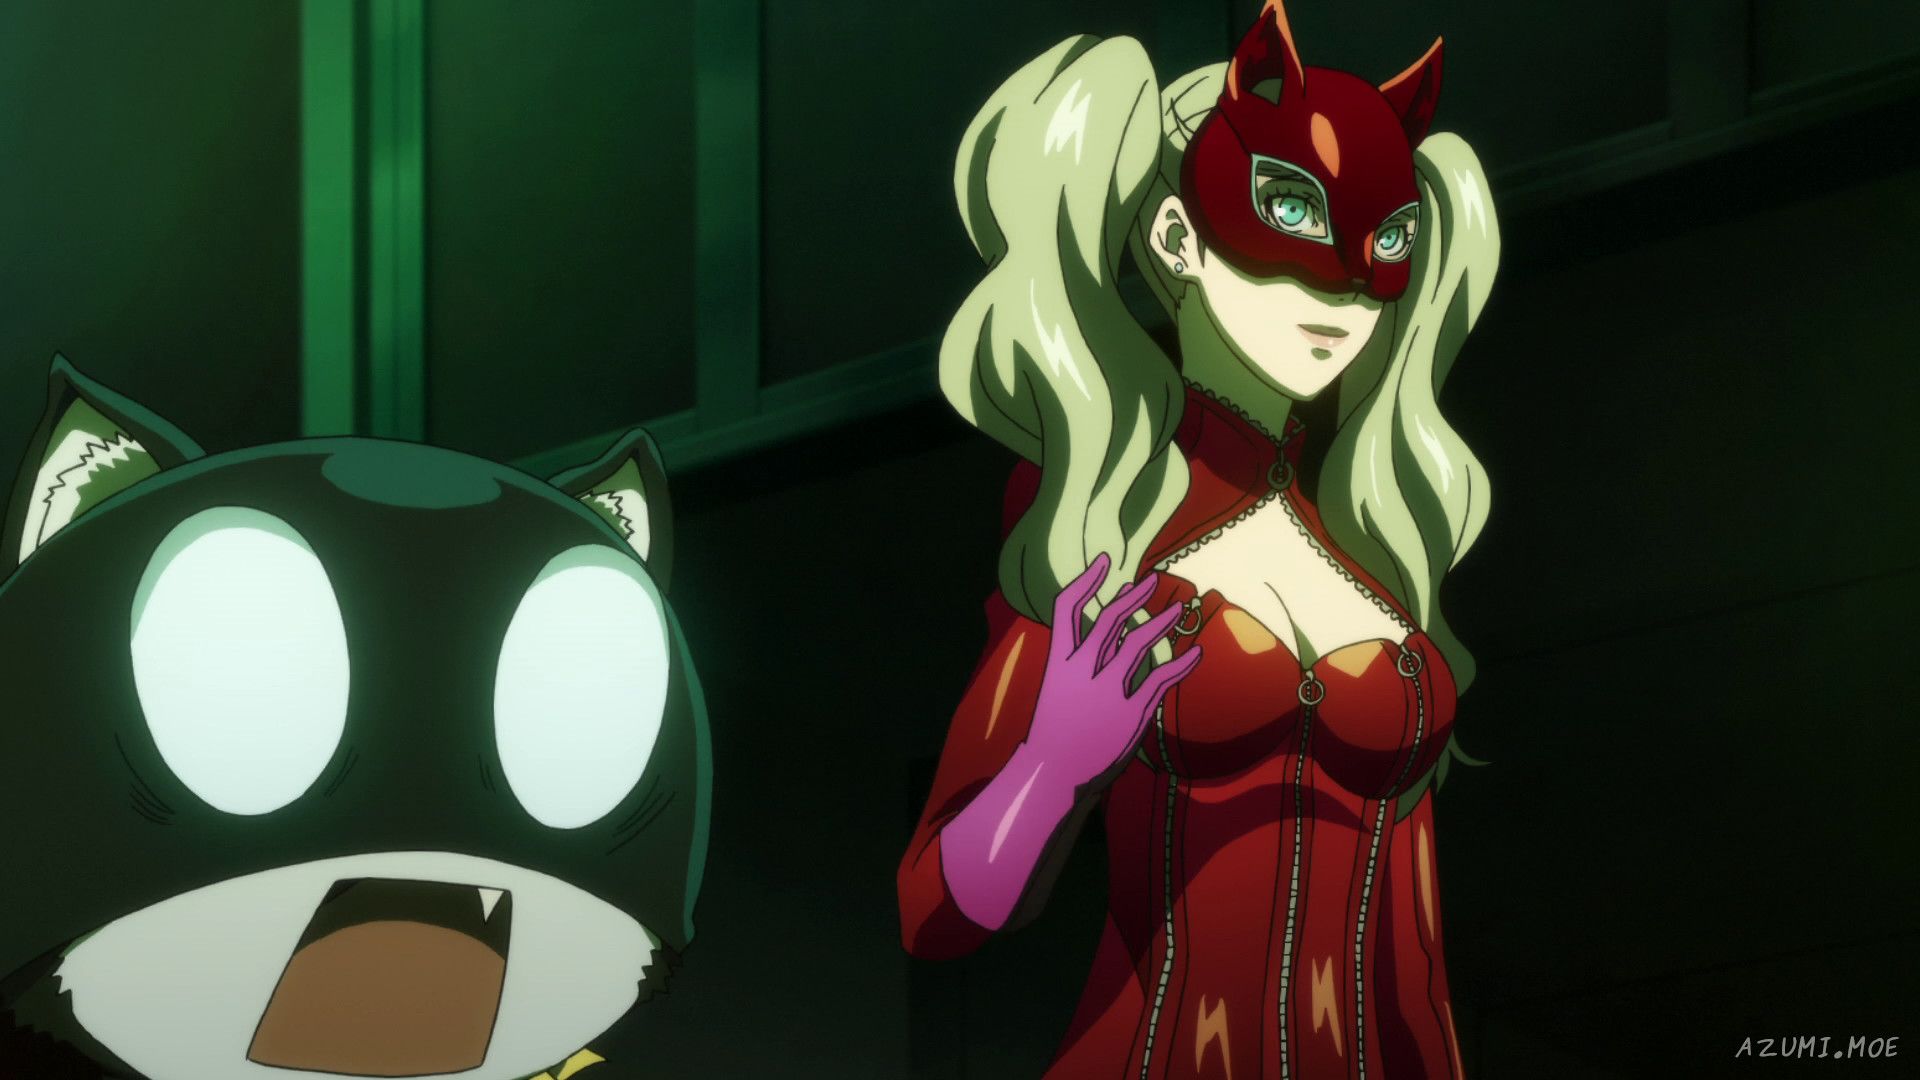 Ann Bad Acting in Anime